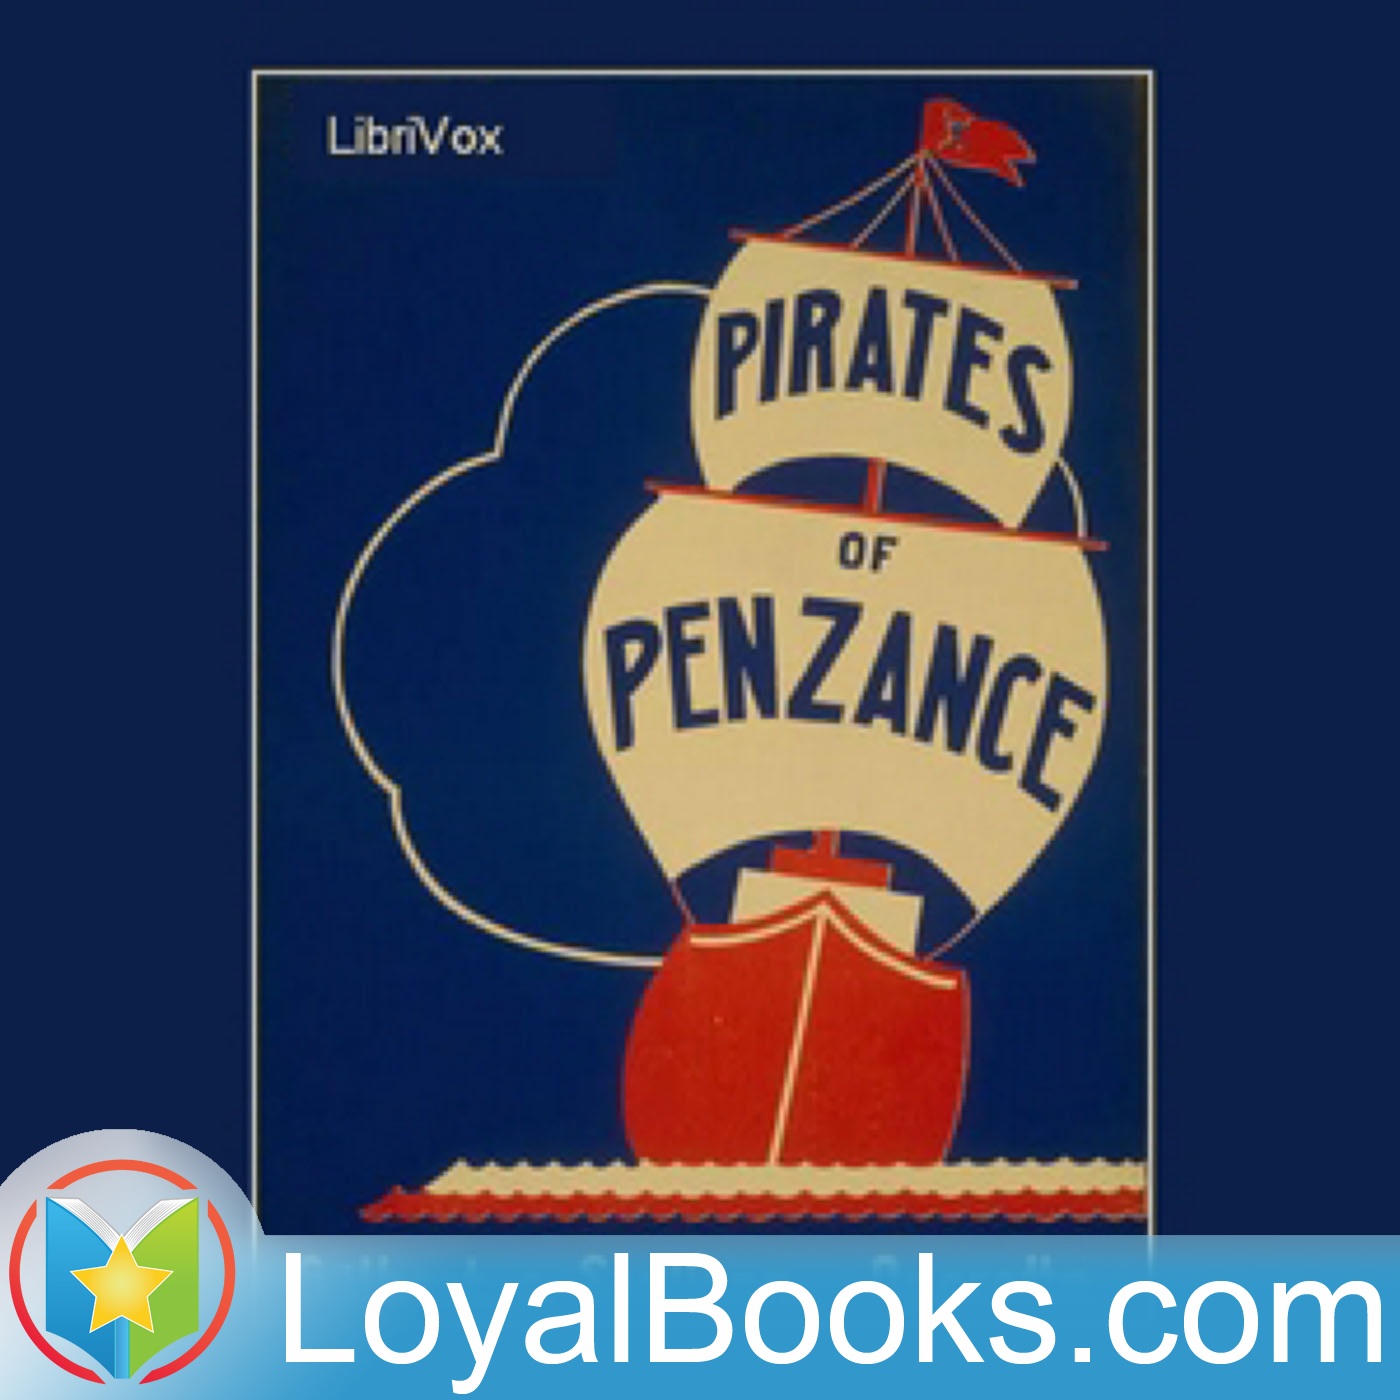 The Pirates of Penzance by William S. Gilbert:Loyal Books